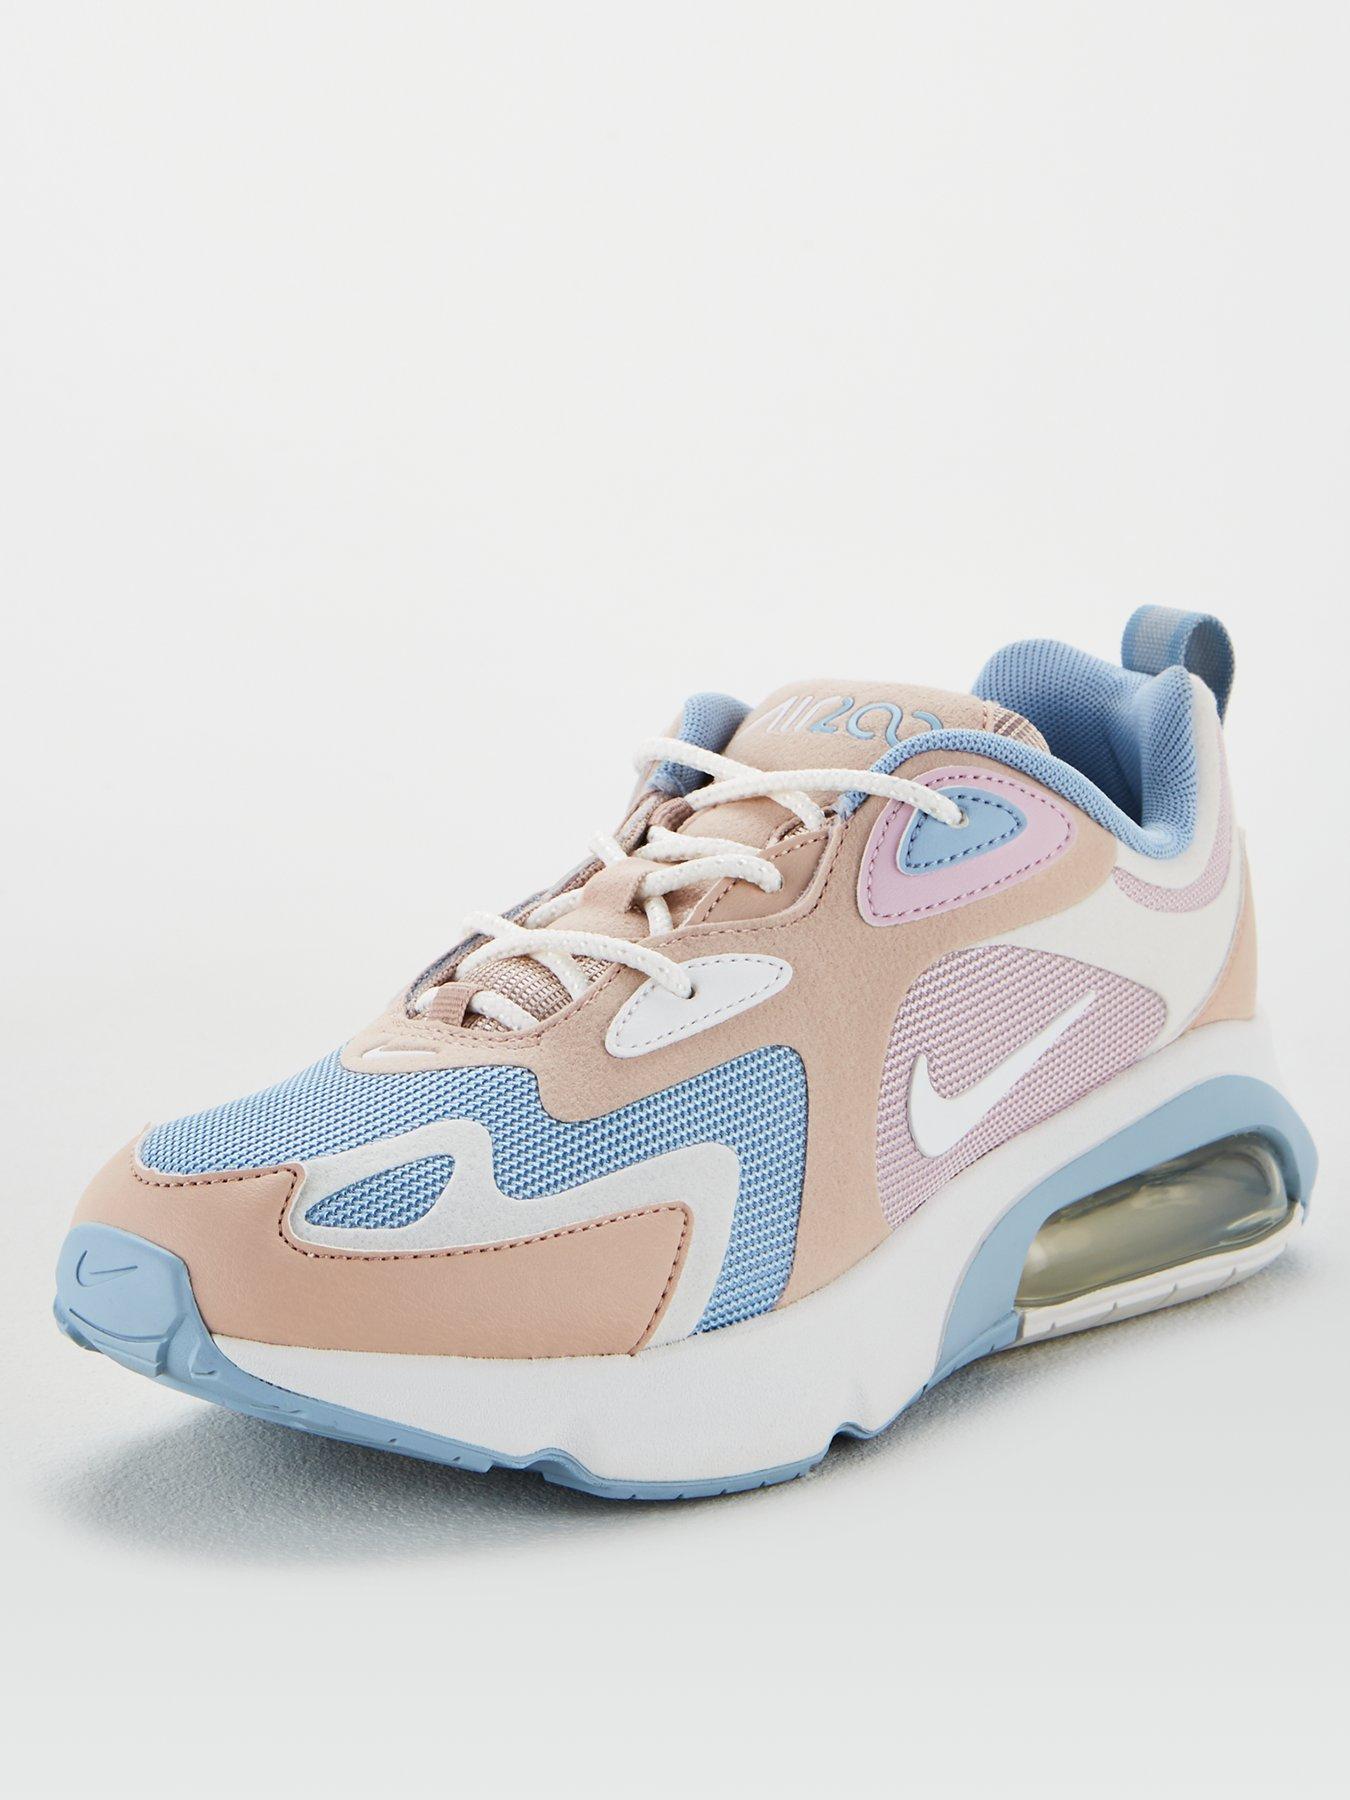 nike air max blue pink and white